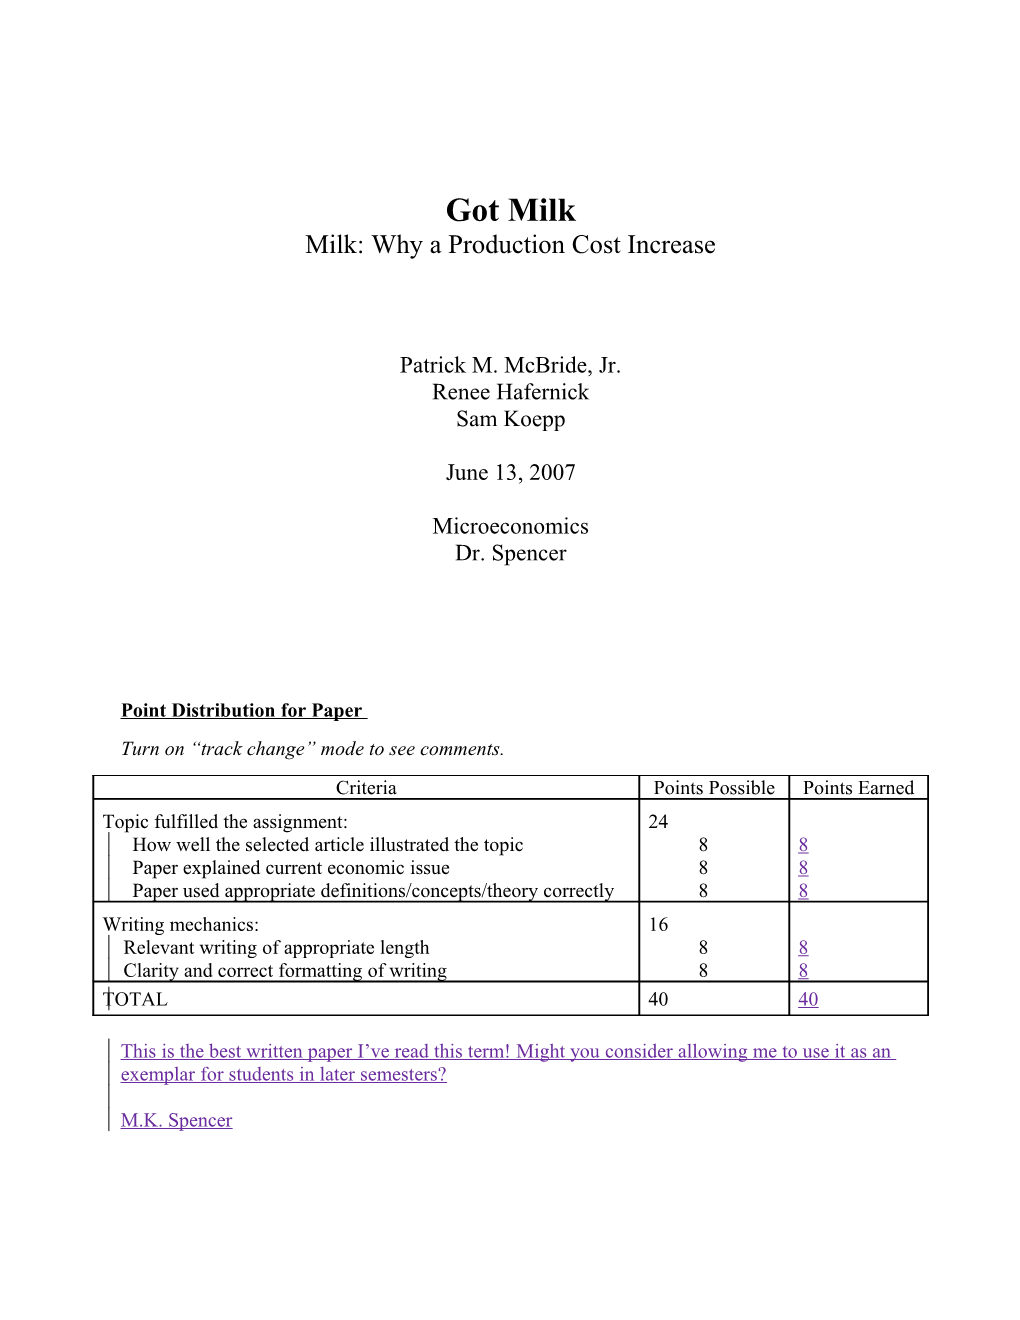 Milk: Why a Production Cost Increase